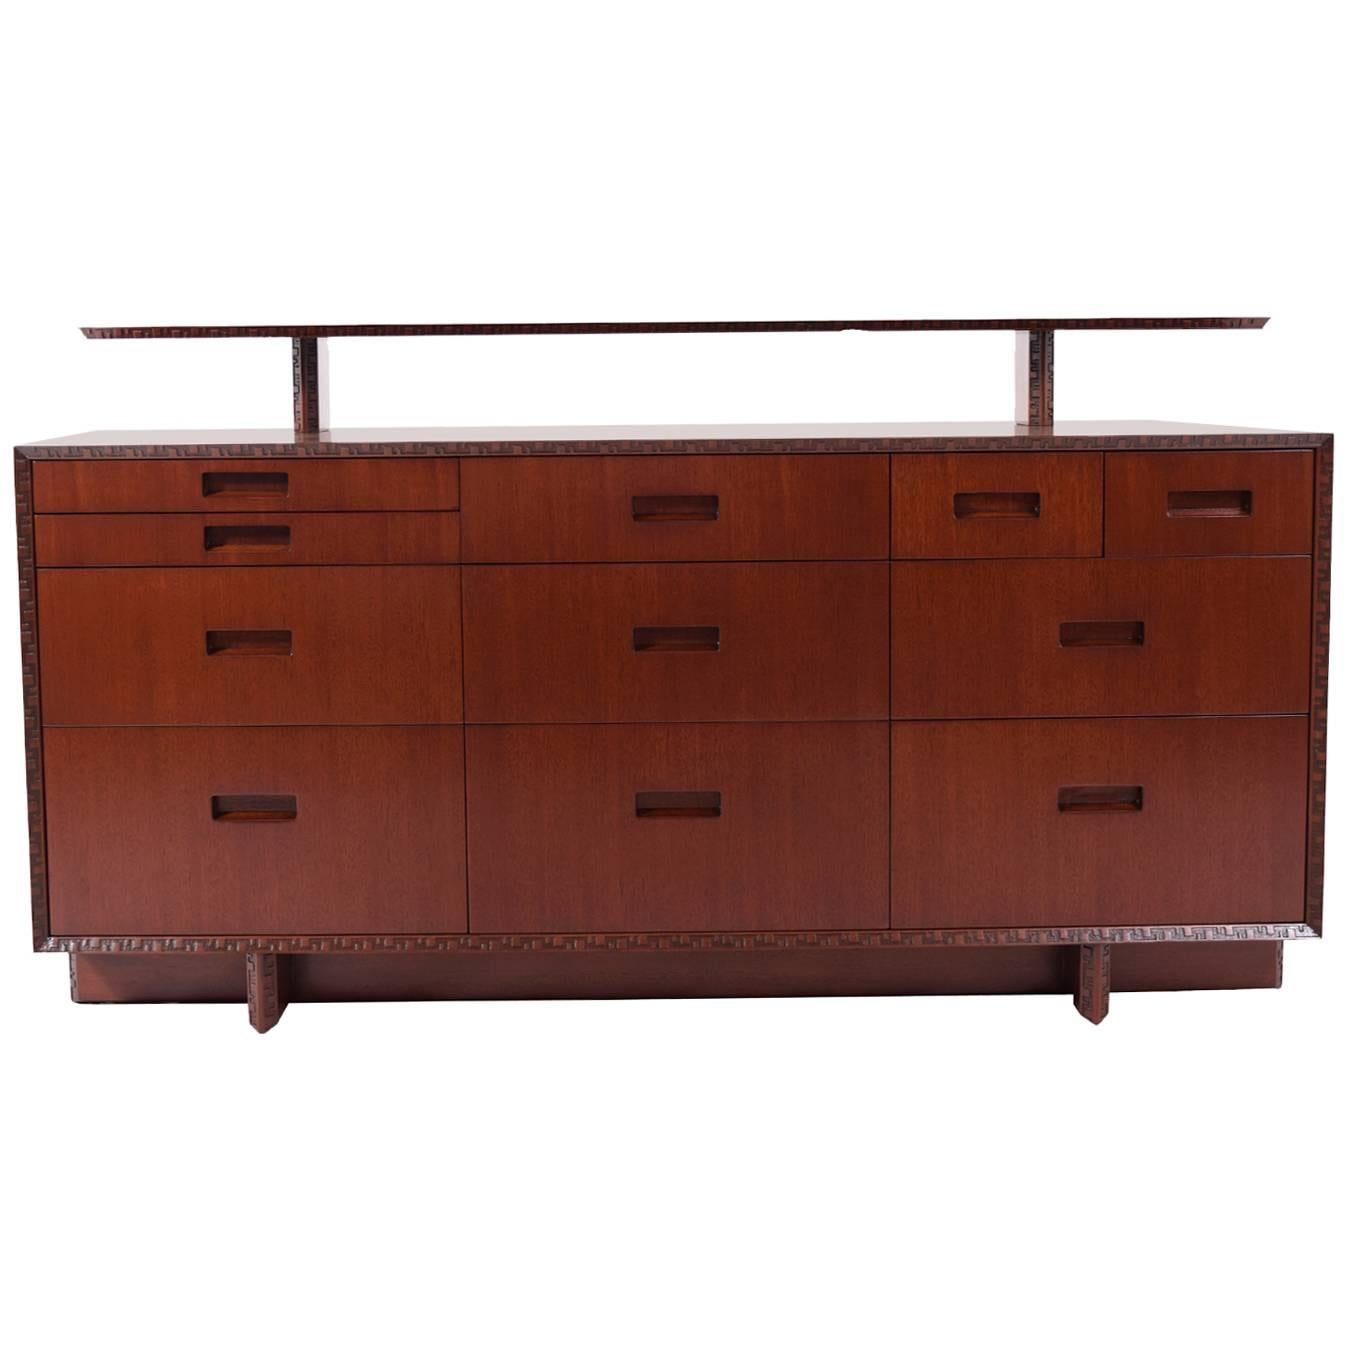 Chest of Drawers with Shelf by Frank Lloyd Wright